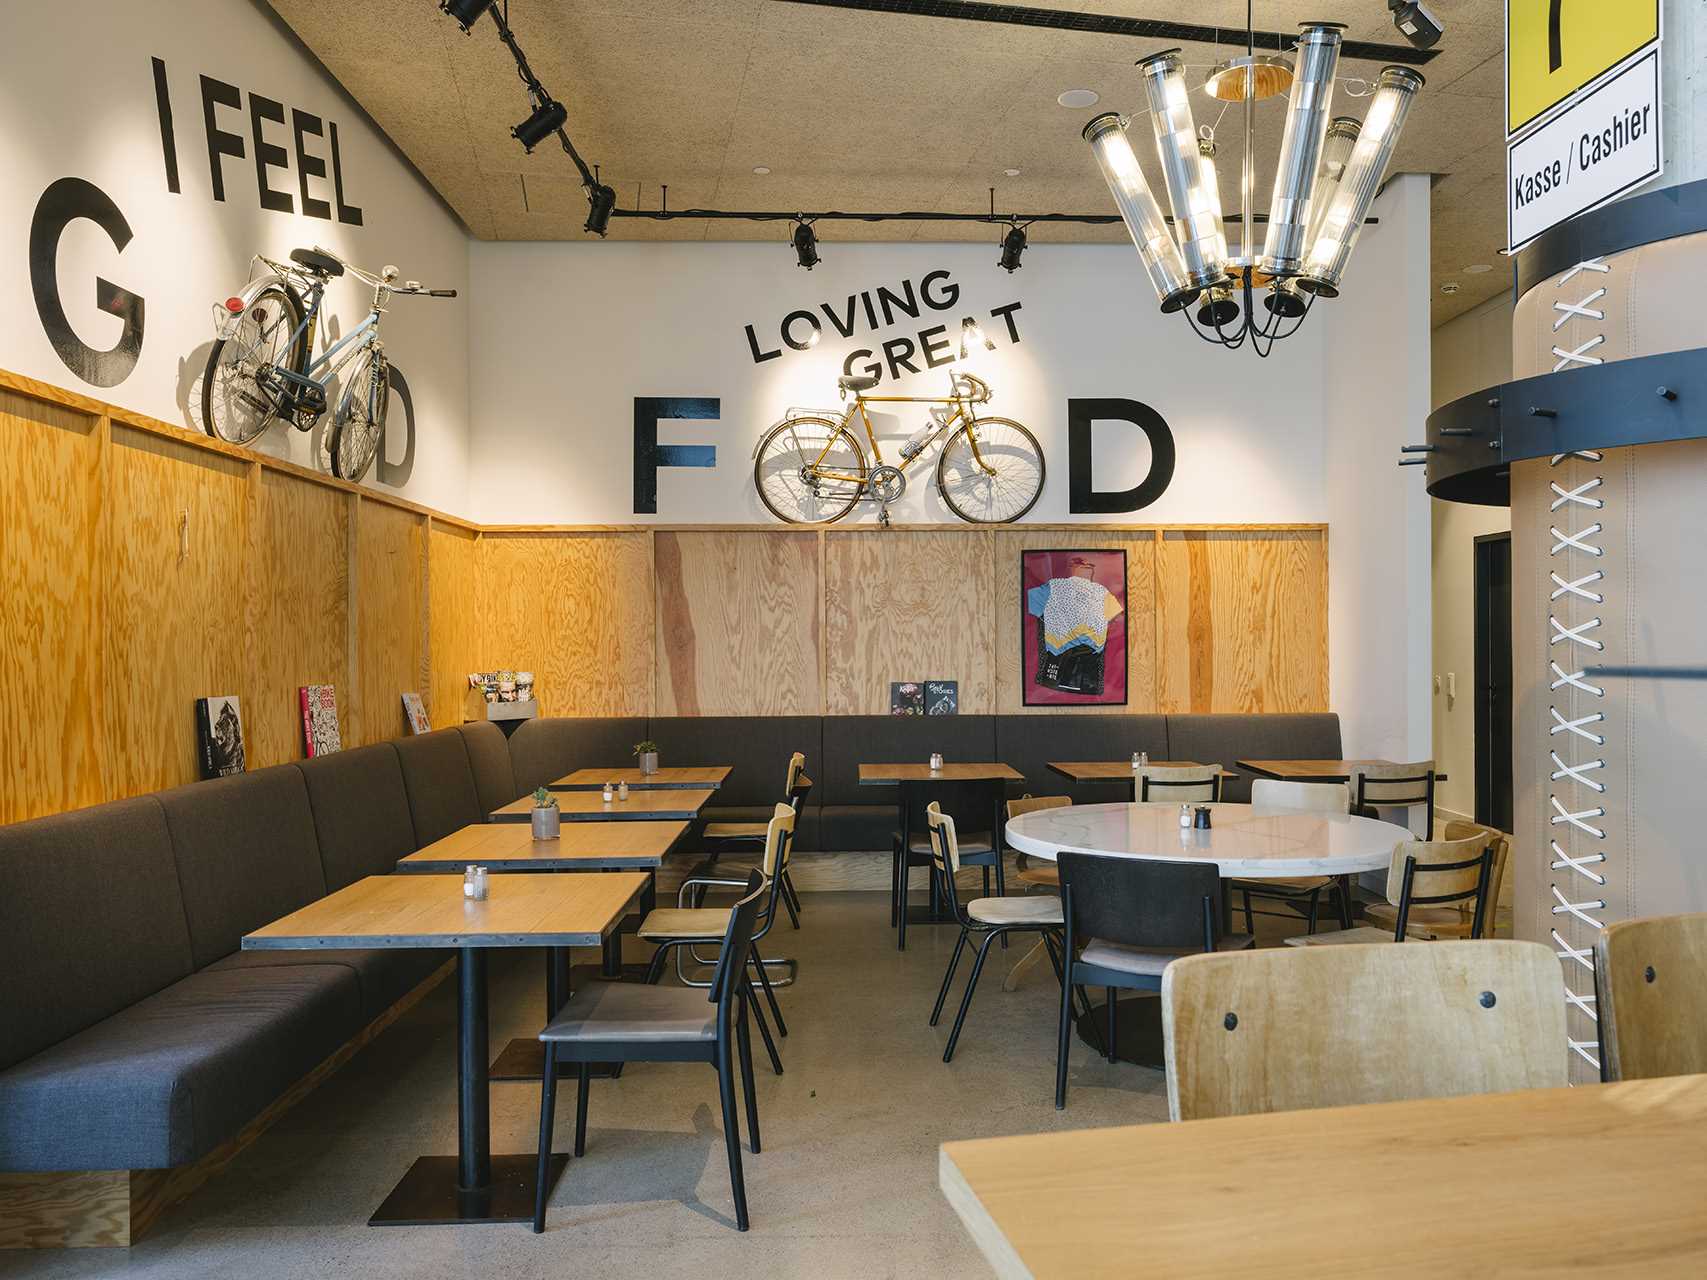 A modern cafe interior in Austria inspired by cycling.